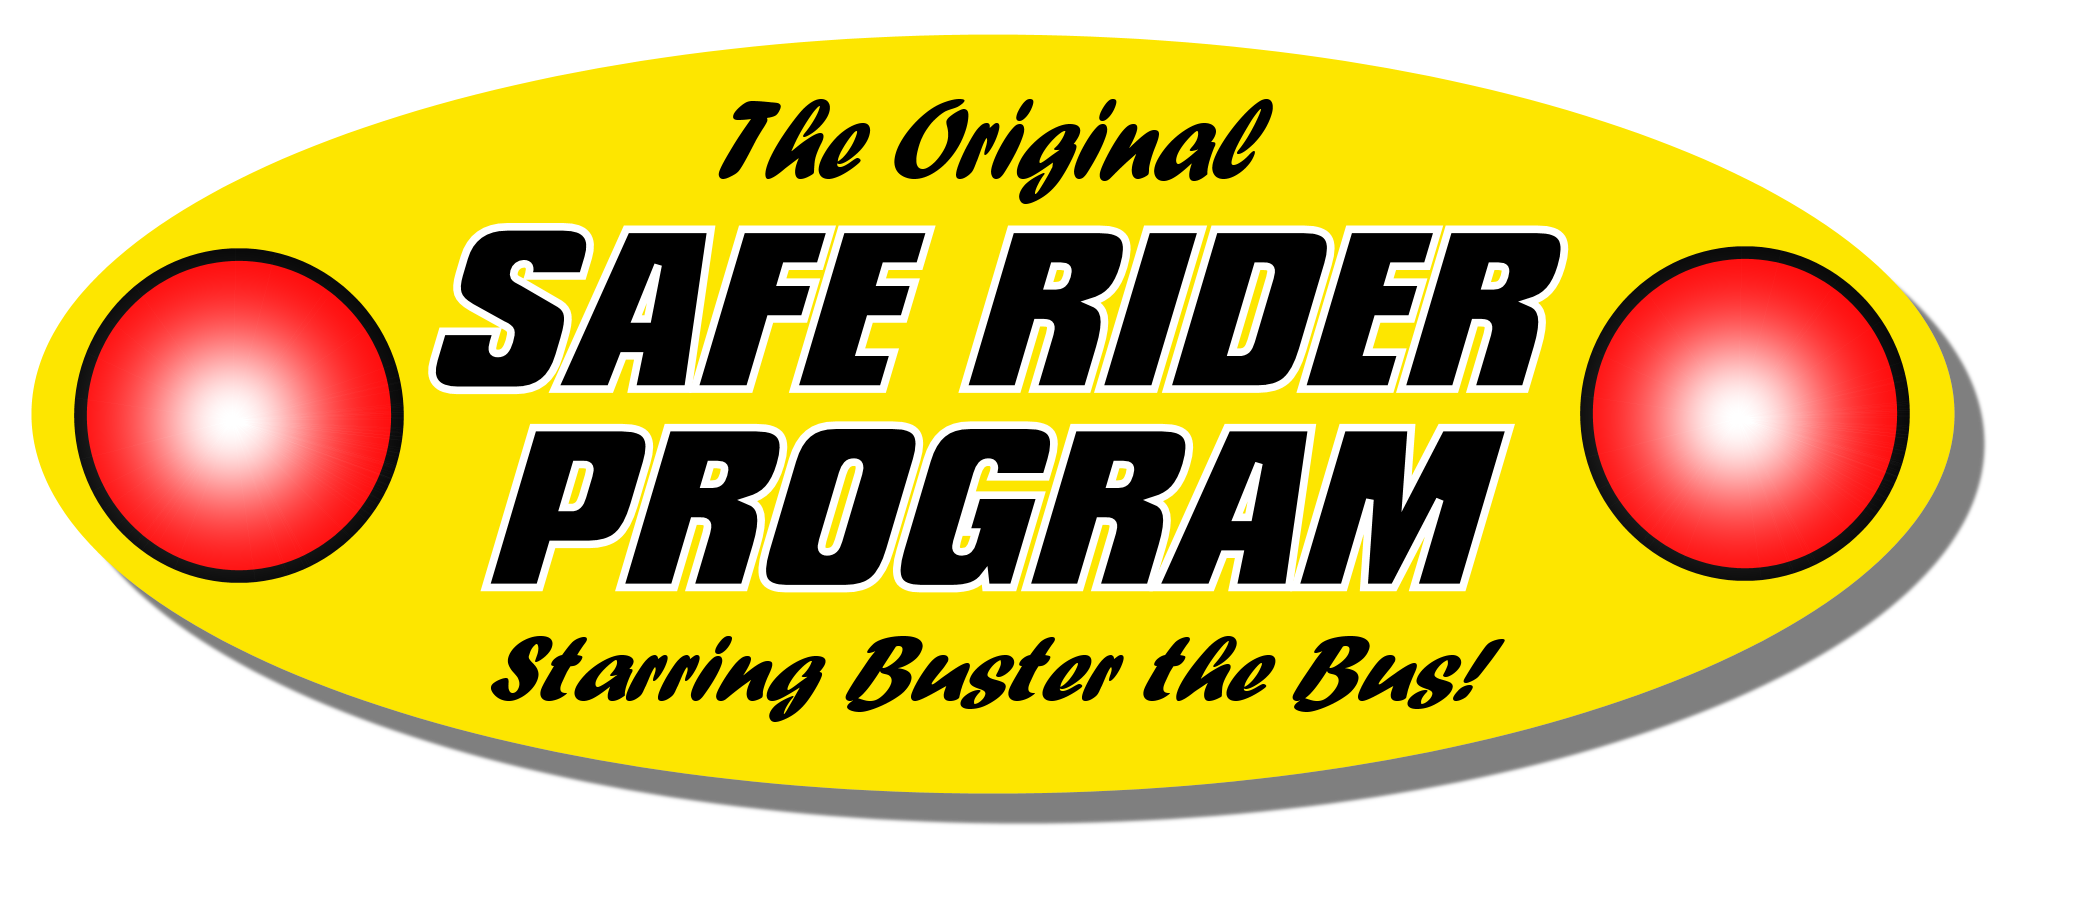 The Safe Rider Program Starring Buster the Bus